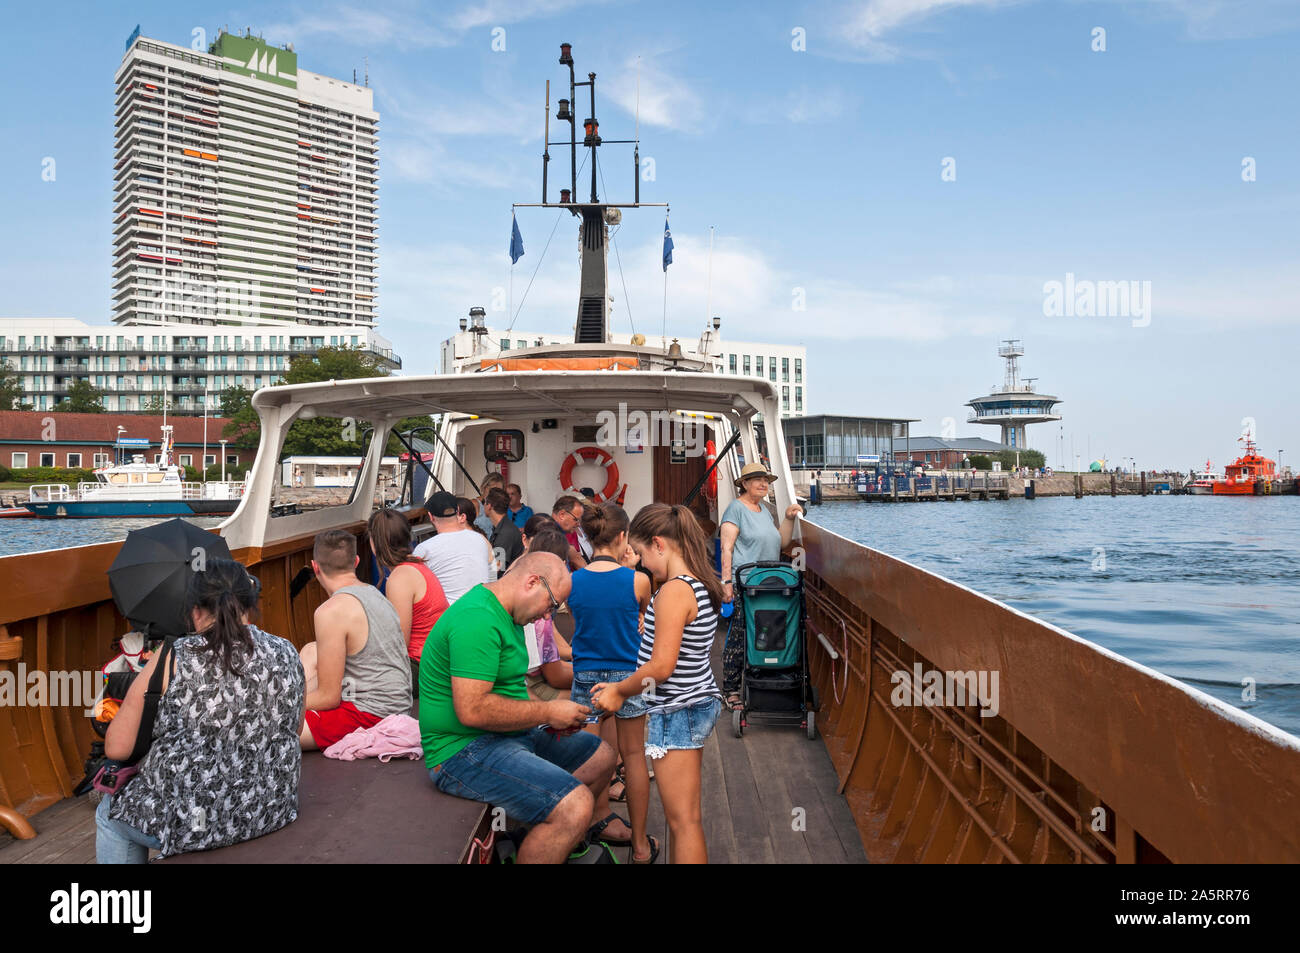 Passengers on the Priwall passenger ferry crossing the Trave in Travemuende, Luebeck on the Baltic Sea, Germany. Stock Photo